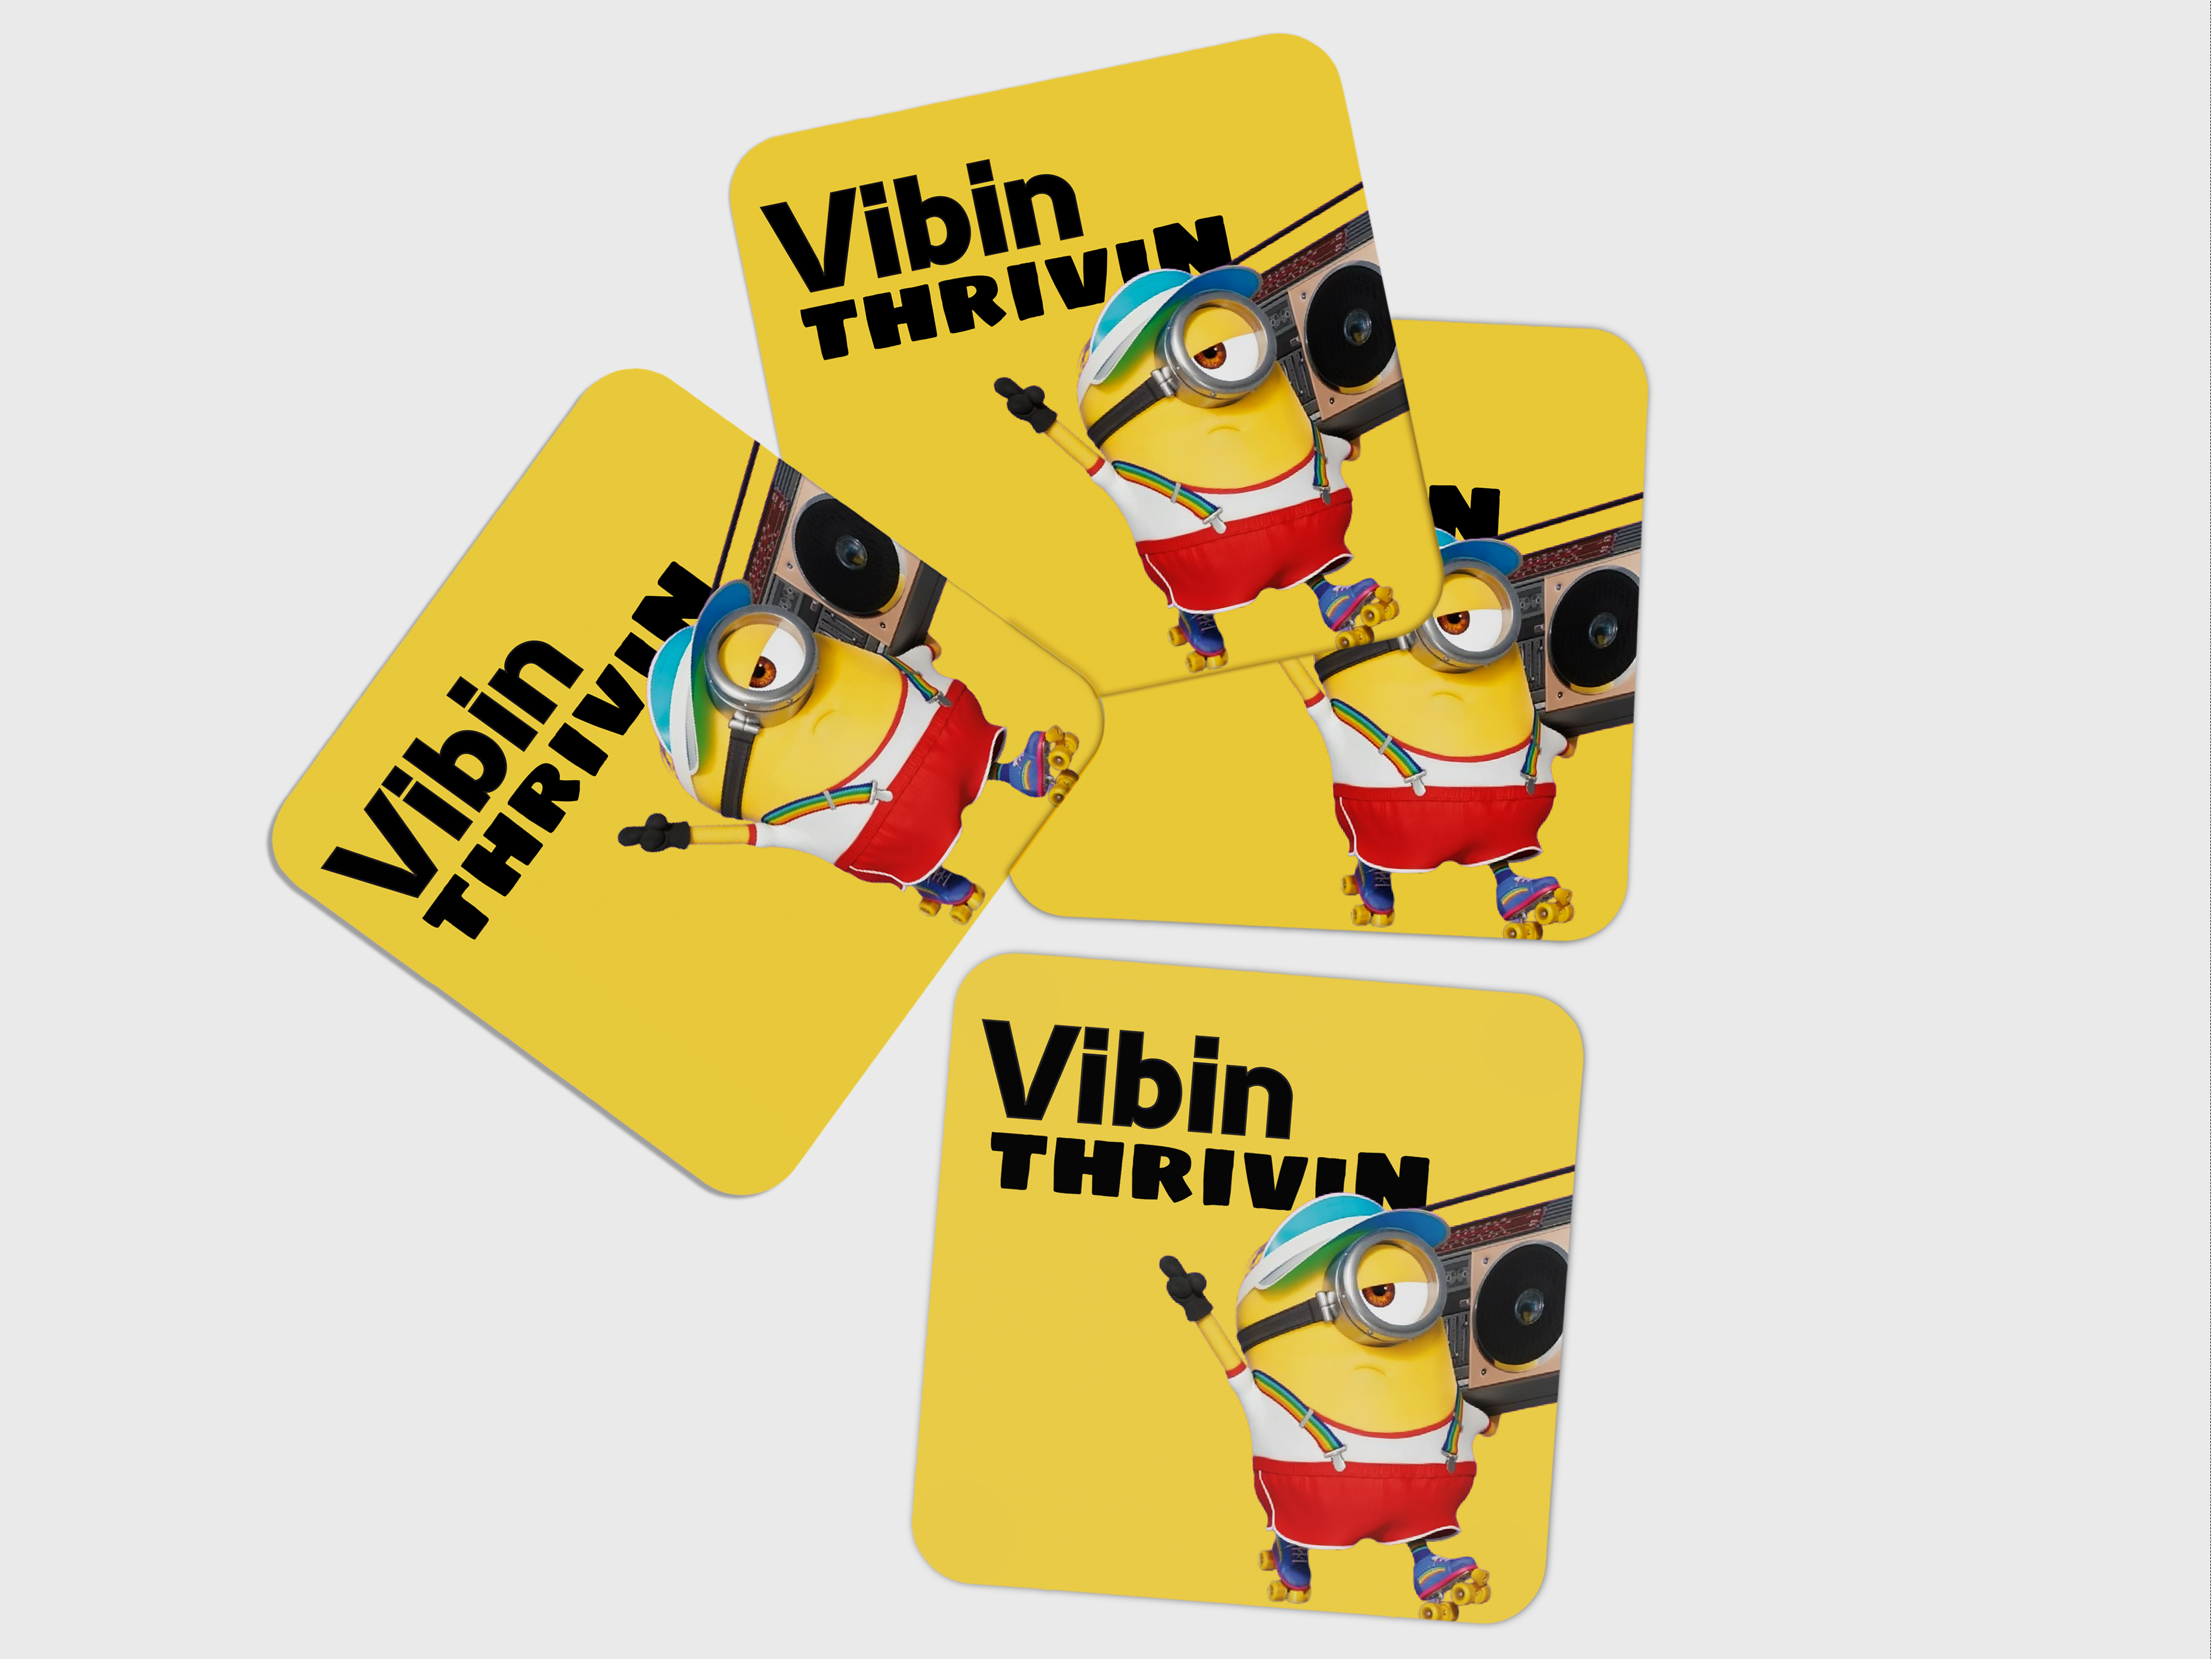 Minions Vibin Thriving Coaster Set - Add Playful Fun to Your Tabletop!